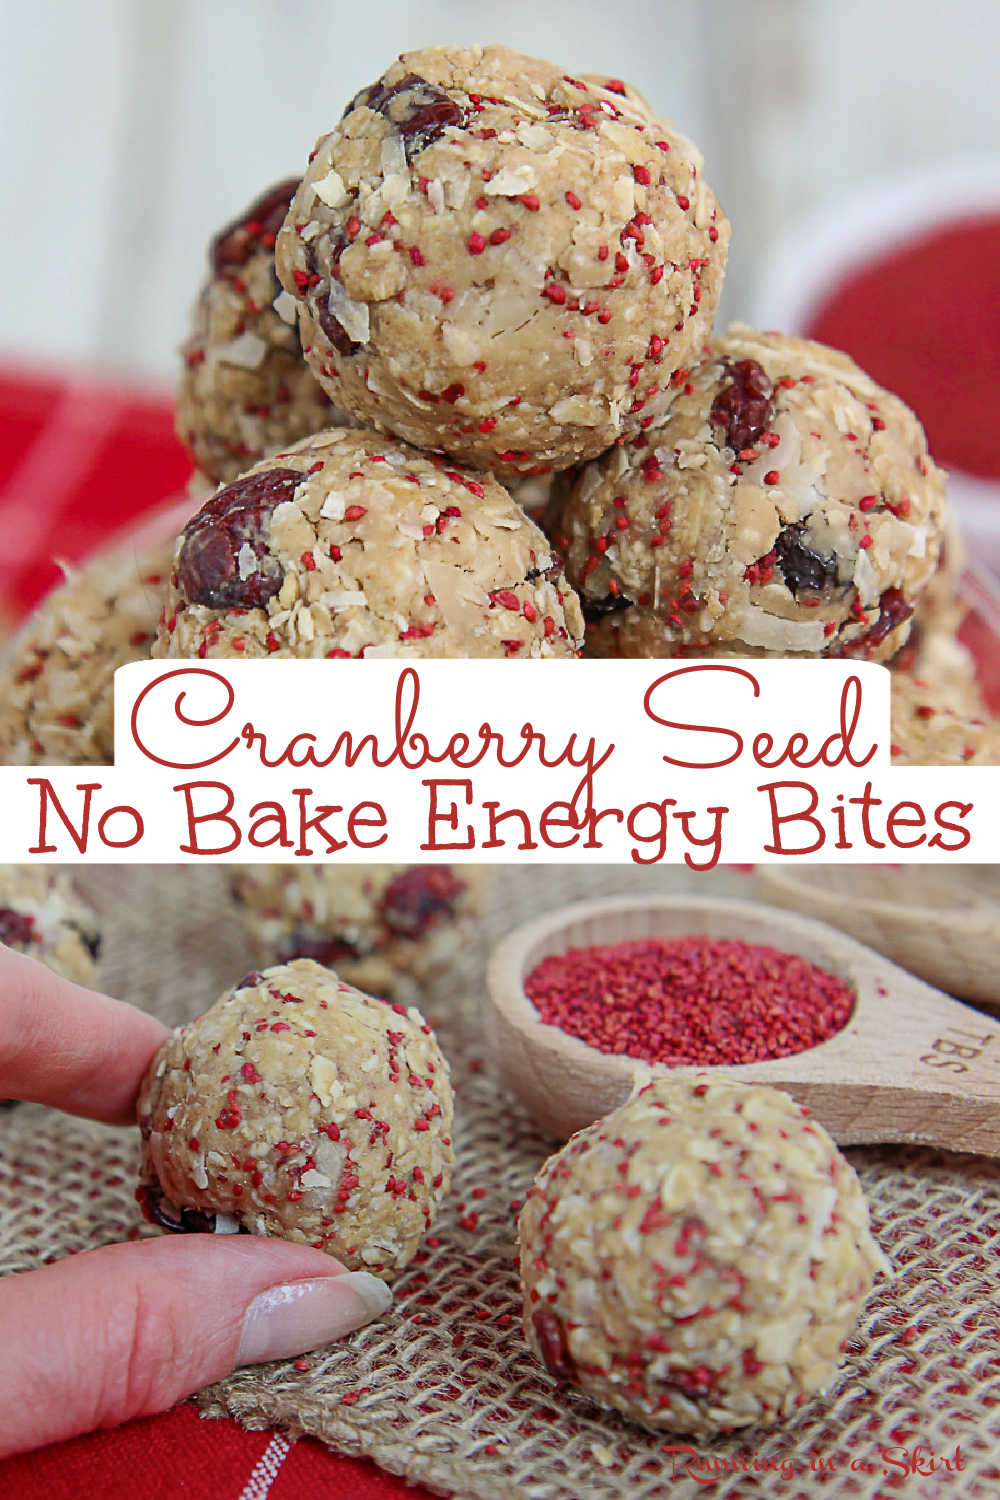 No Bake Cranberry Oatmeal Energy Bites with Cranberry Seeds - Cranberry Energy Ball recipe. A clean eating, healthy no bake snack with peanut butter and coconut. No added sugar protein ball. Includes information about the health benefits of cranberry seeds. Low Calorie, Gluten Free Option, Vegan, Dairy Free / Running in a Skirt #AD #oceansprayseeds #cranberryseeds #cranberry #healthy @OceanSpray via @juliewunder